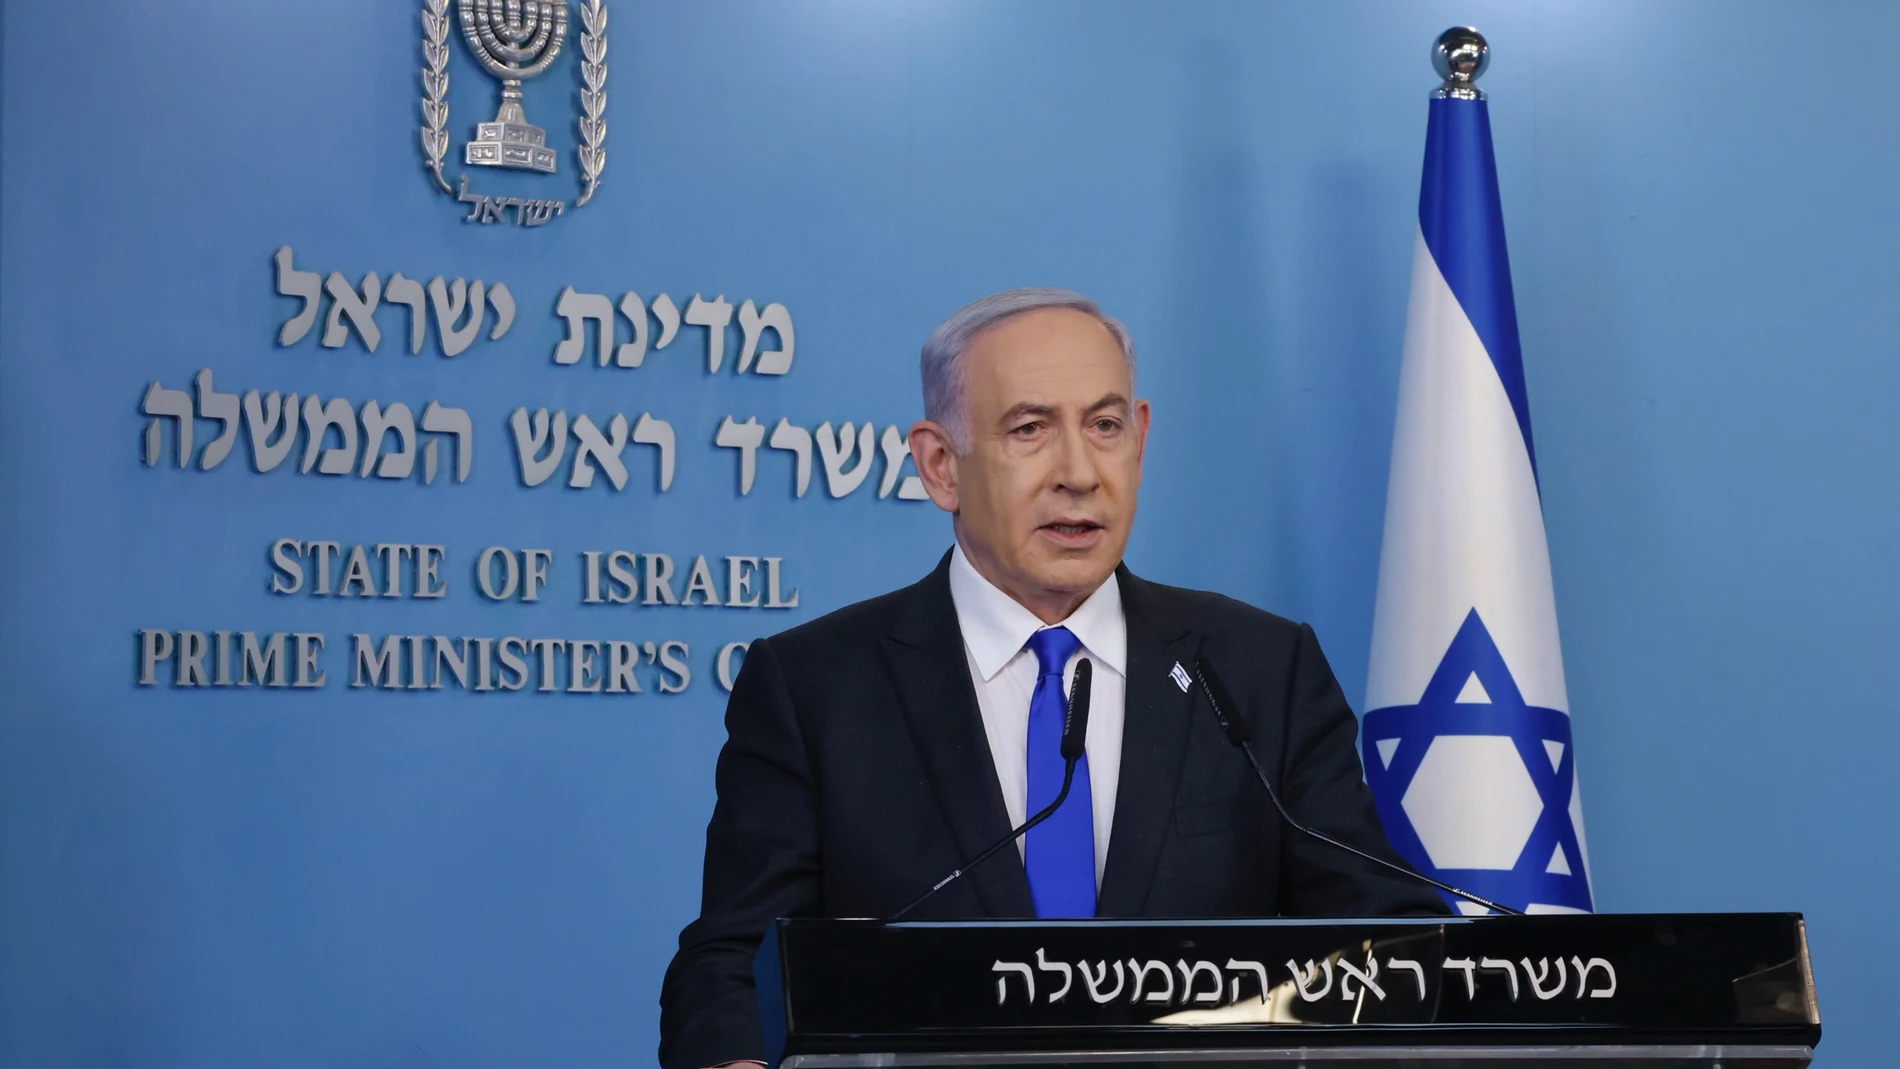 JERUSALEM, Feb. 7, 2024 -- Israeli Prime Minister Benjamin Netanyahu speaks at a press conference at the Prime Minister's office in Jerusalem, on Feb. 7, 2024. Netanyahu rejected Hamas's proposal for a ceasefire in the Gaza Strip on Wednesday.07/02/2024